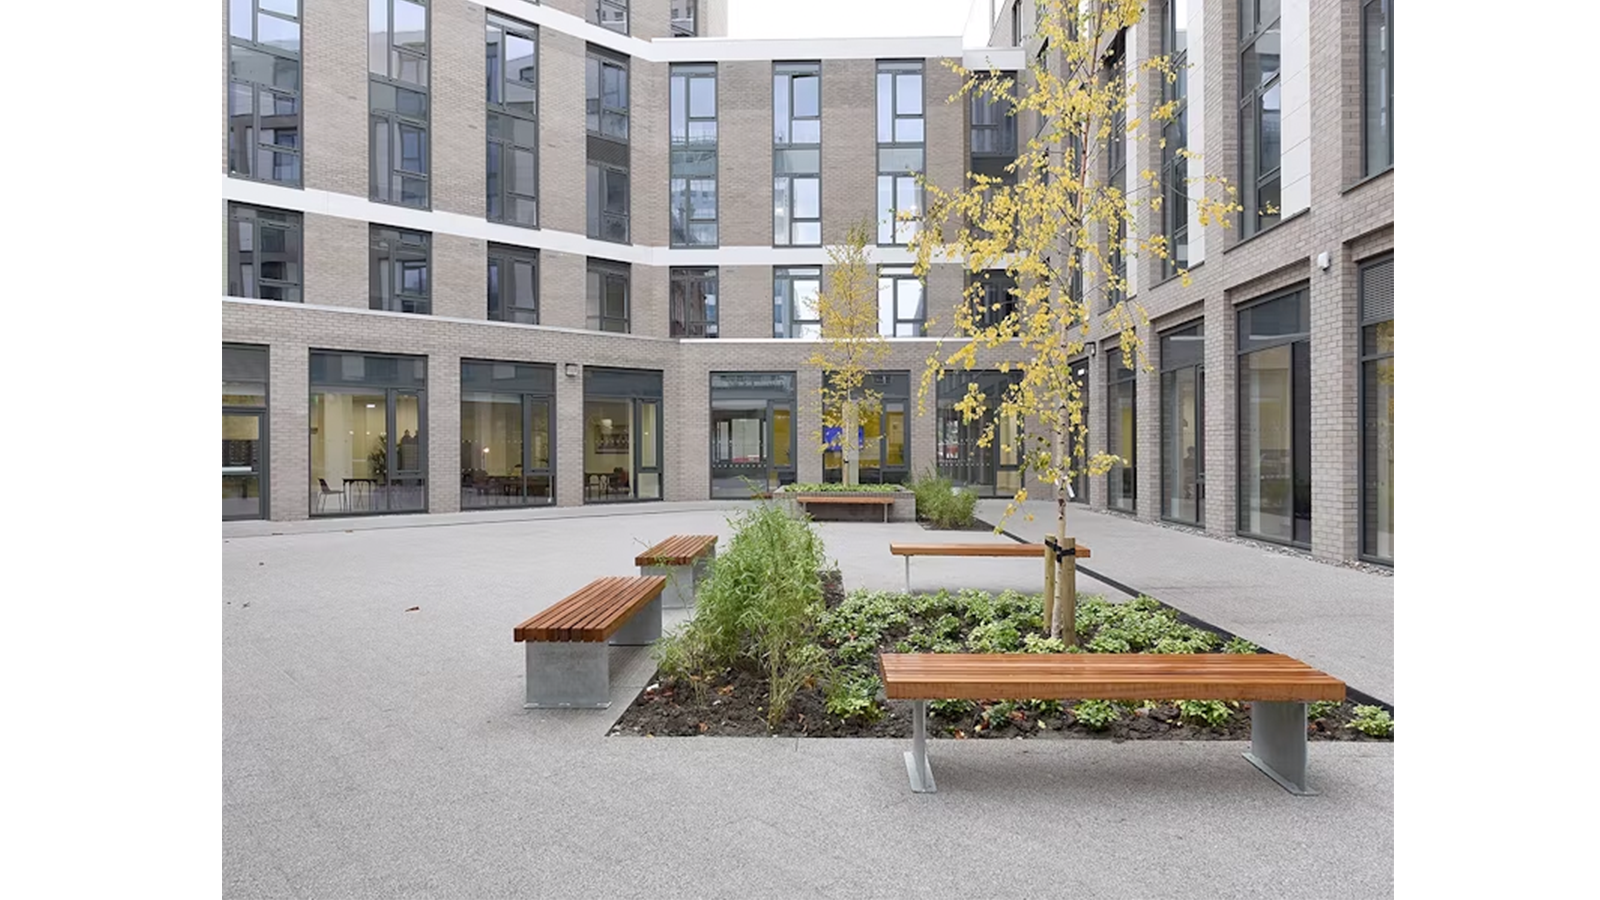 Strathclyde student accommodation courtyard at St. Mungo's